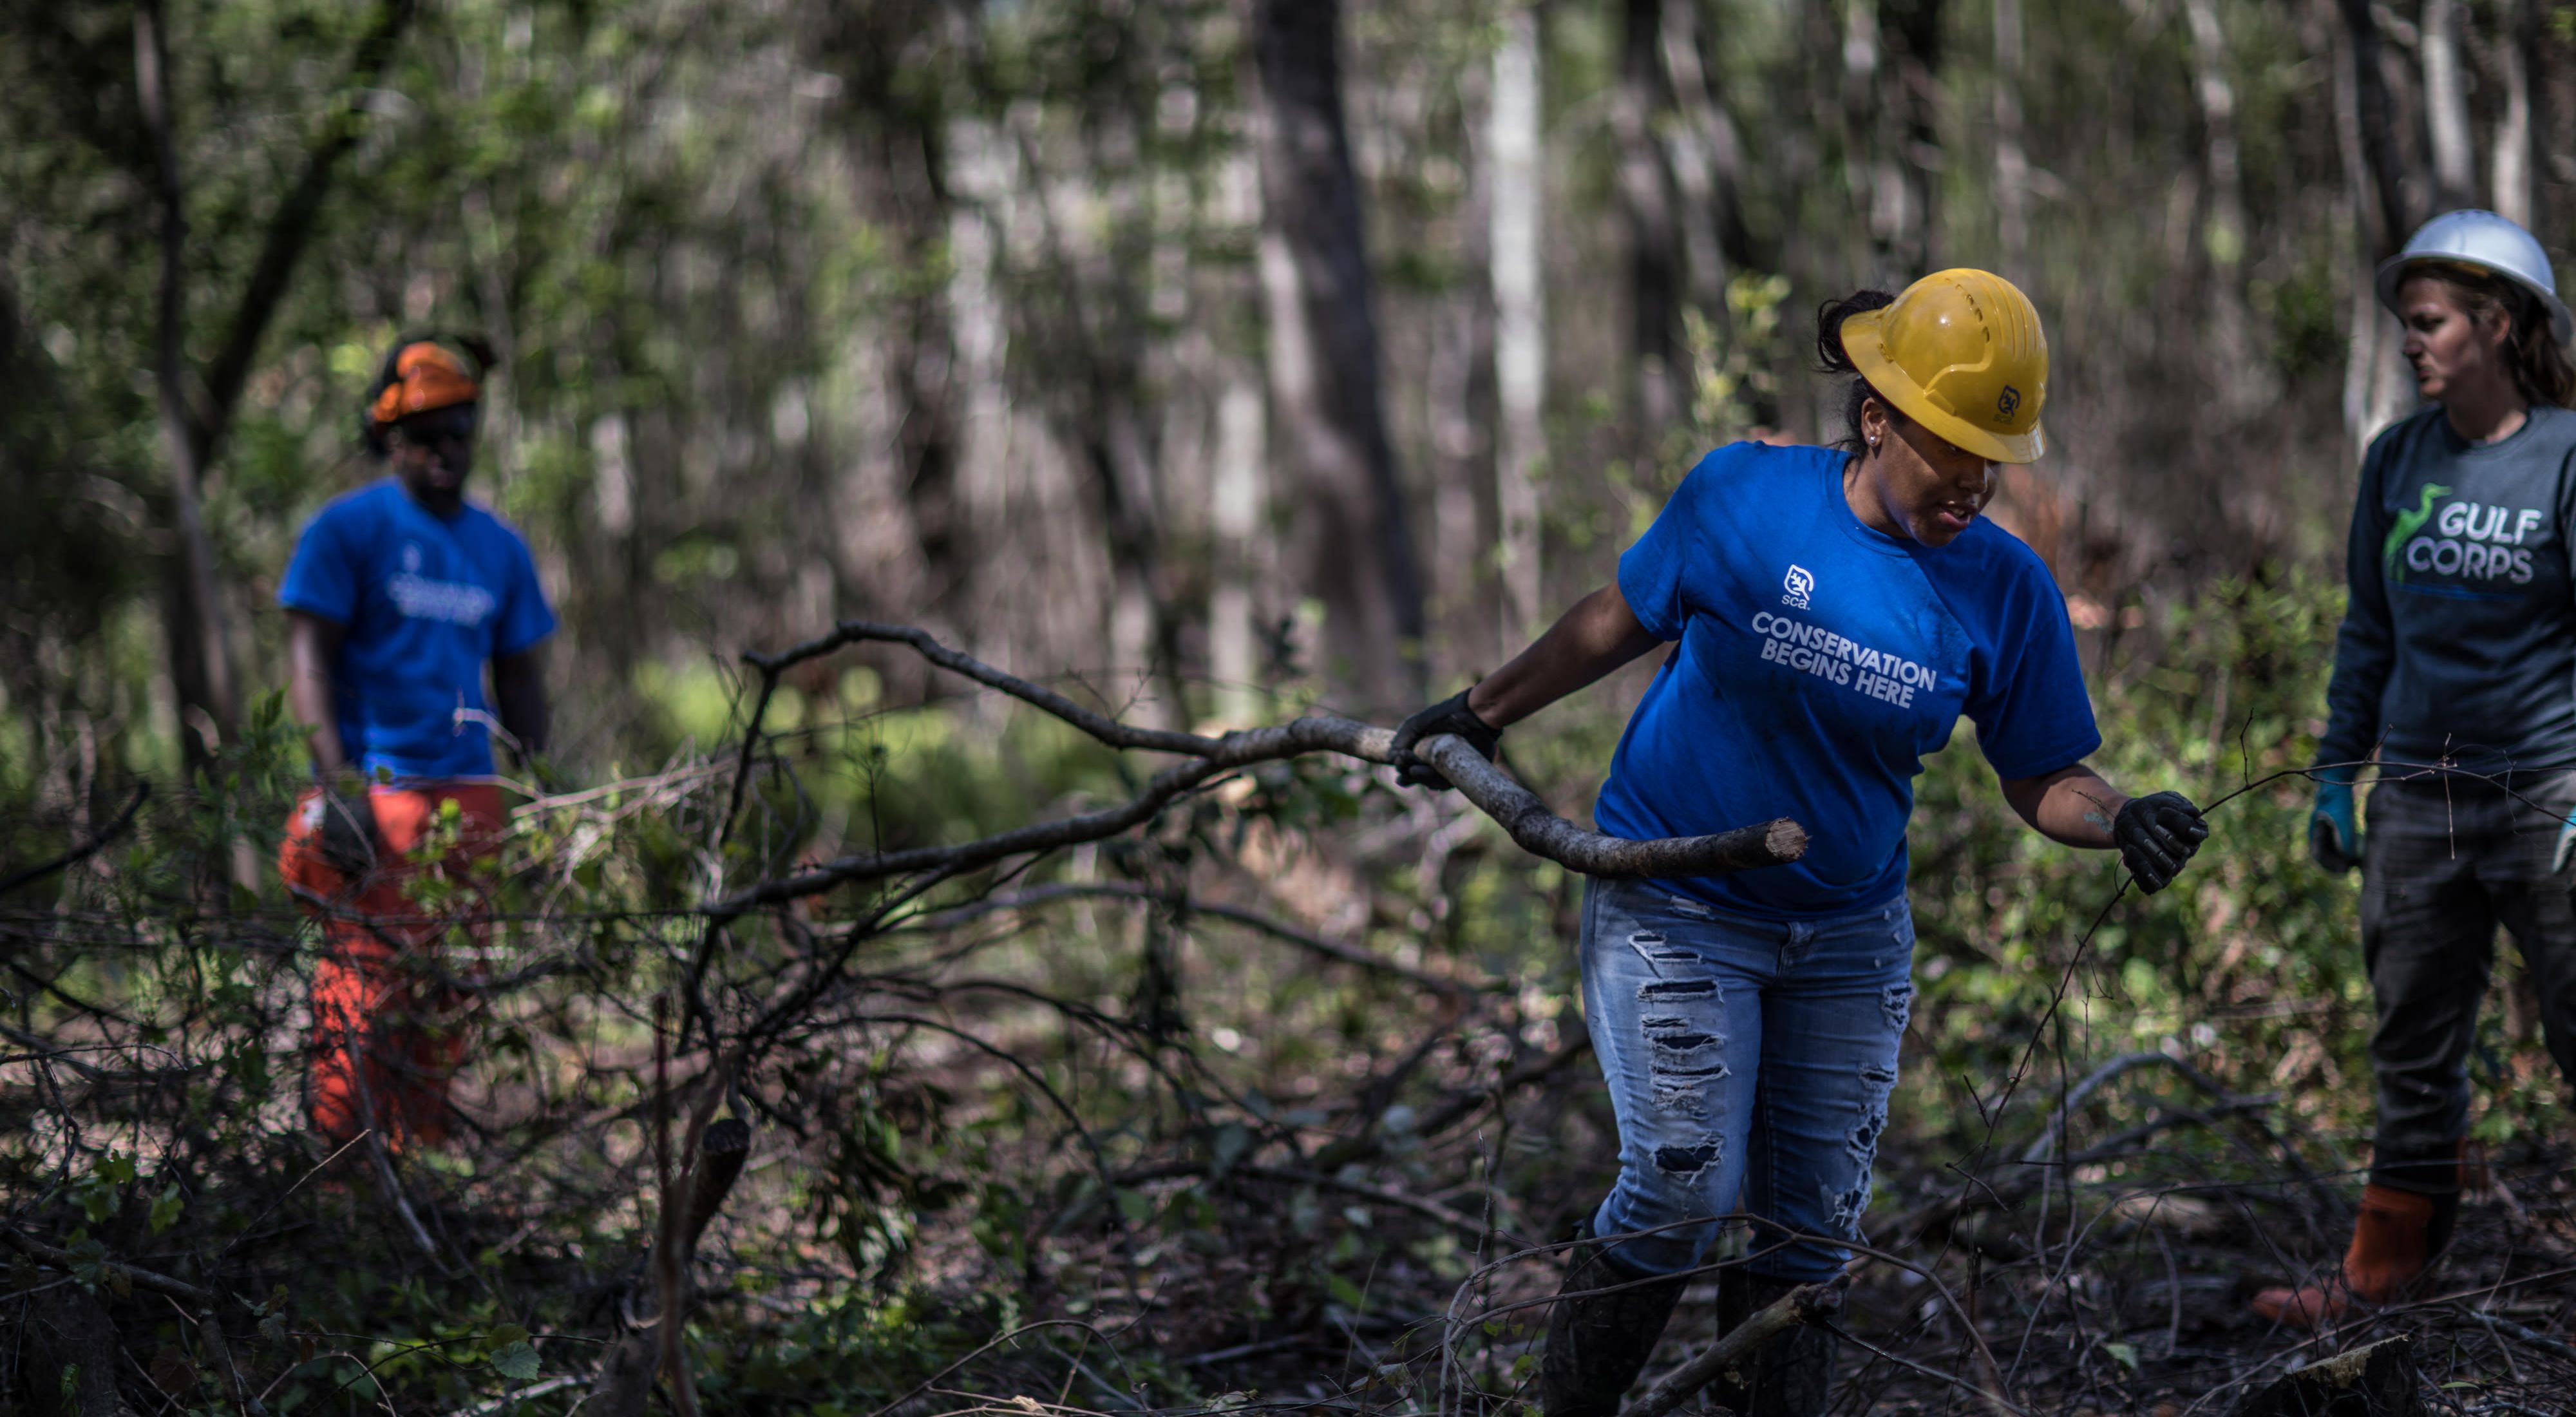 Three young people in hard hats, gloves and conservation corps shirts, clearing branches in a forest.